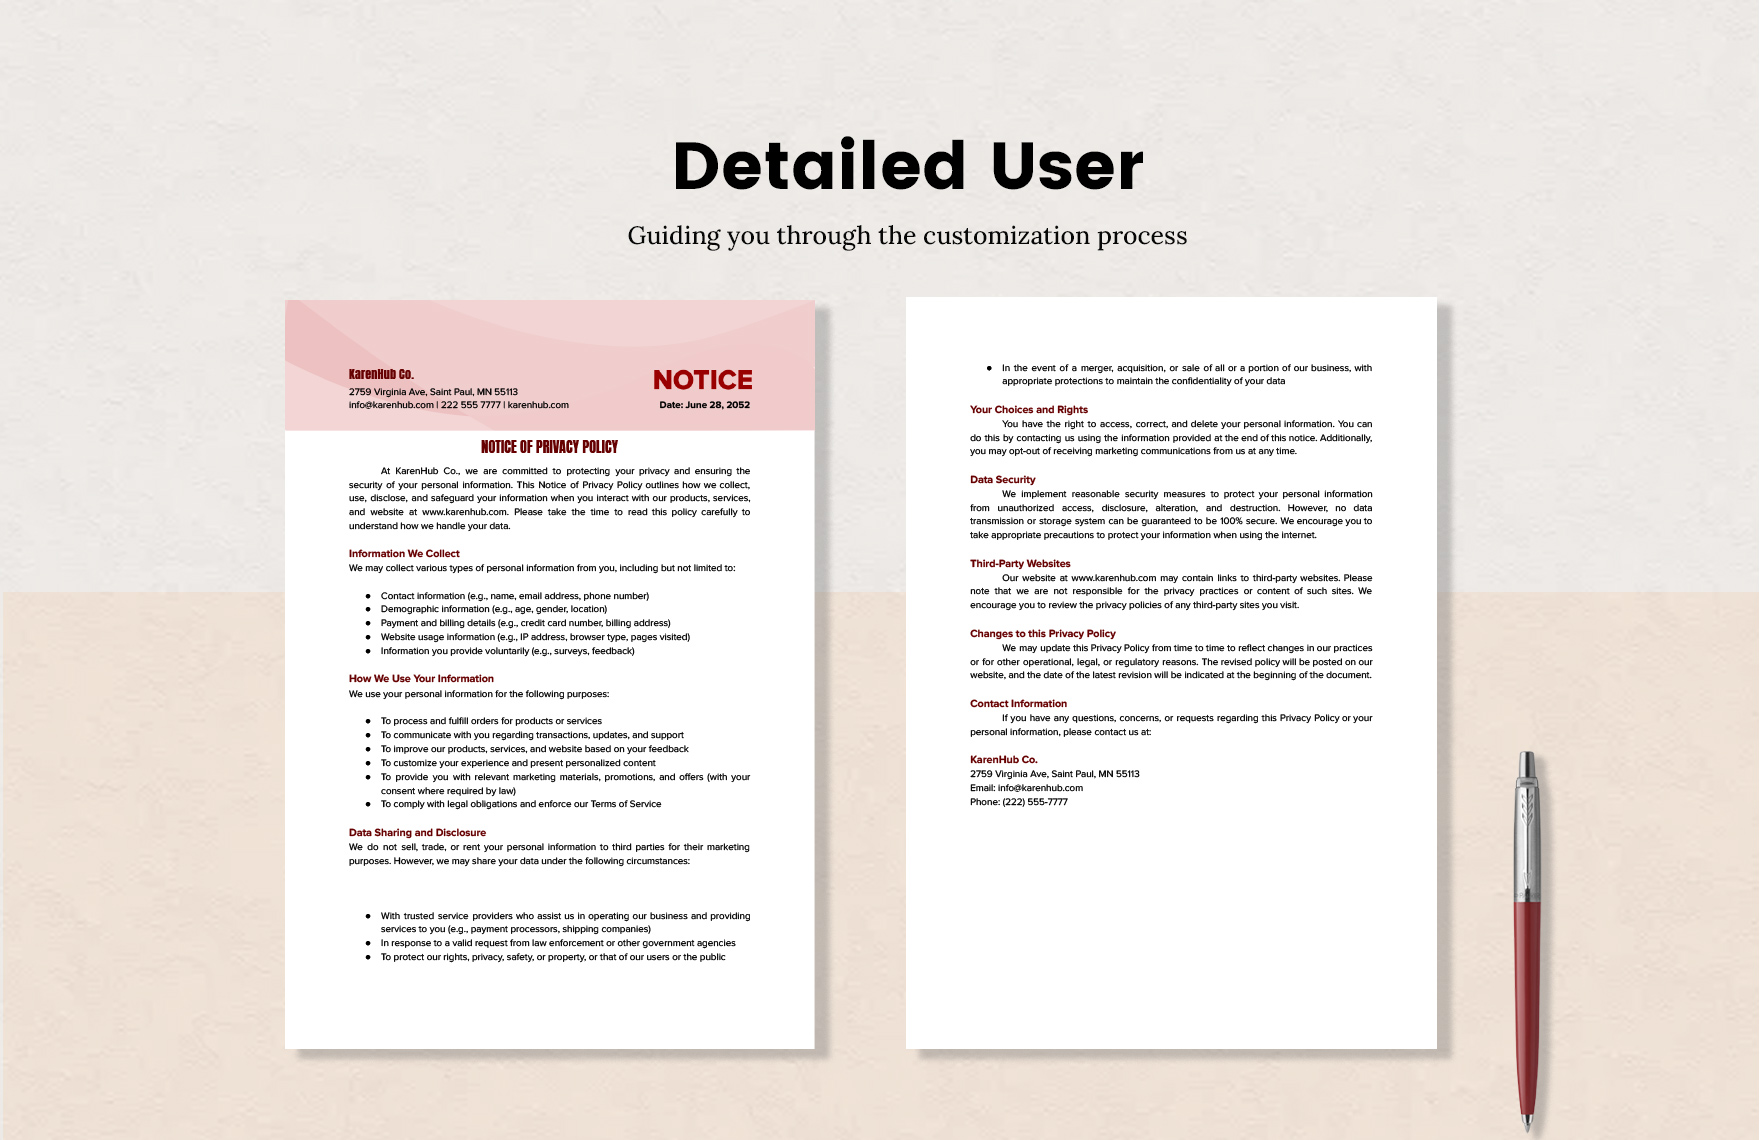 Notice of Privacy Policy Template